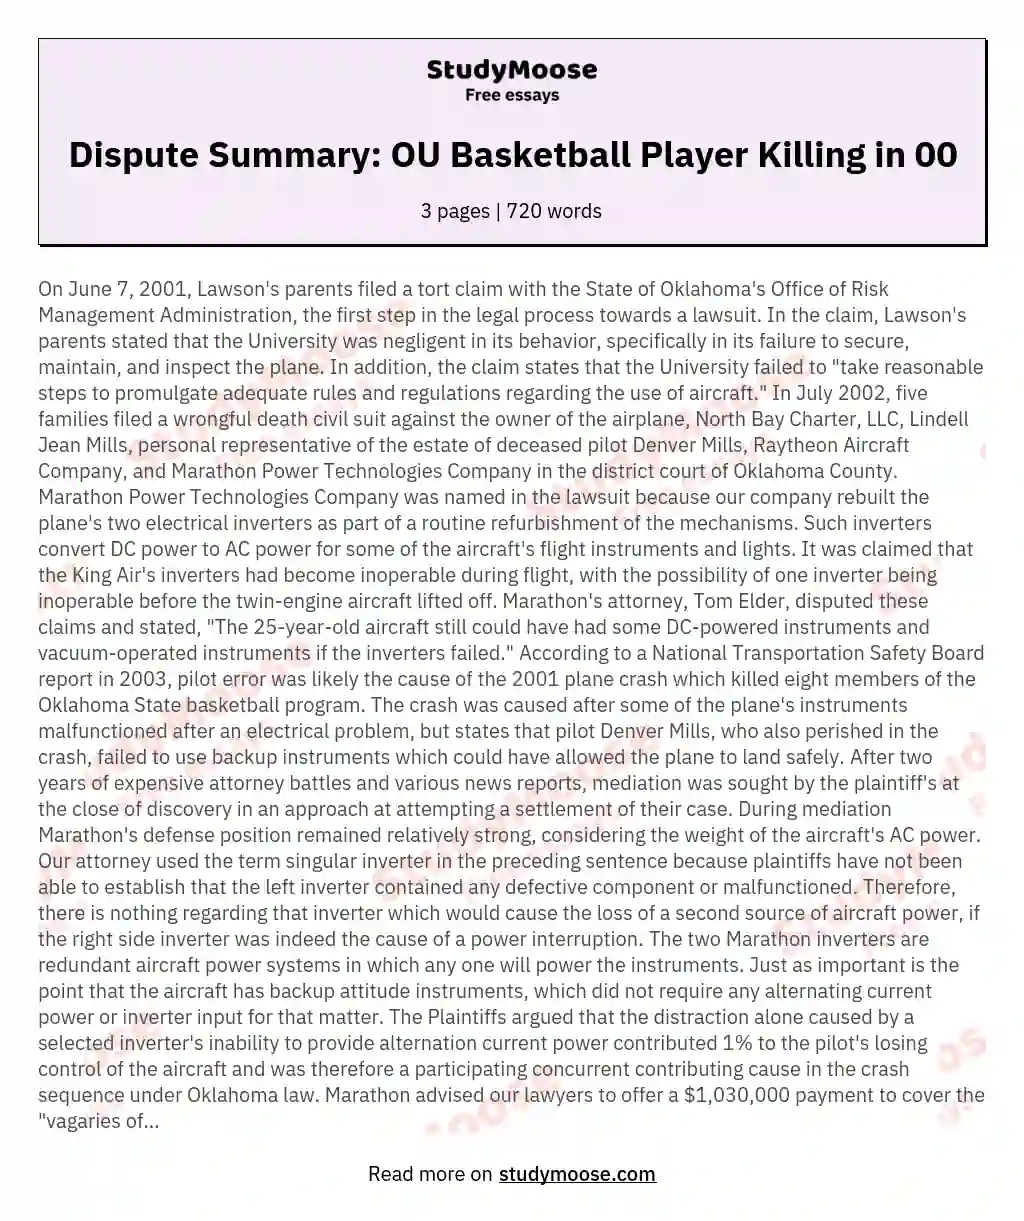 Dispute Summary: OU Basketball Player Killing in 00 essay